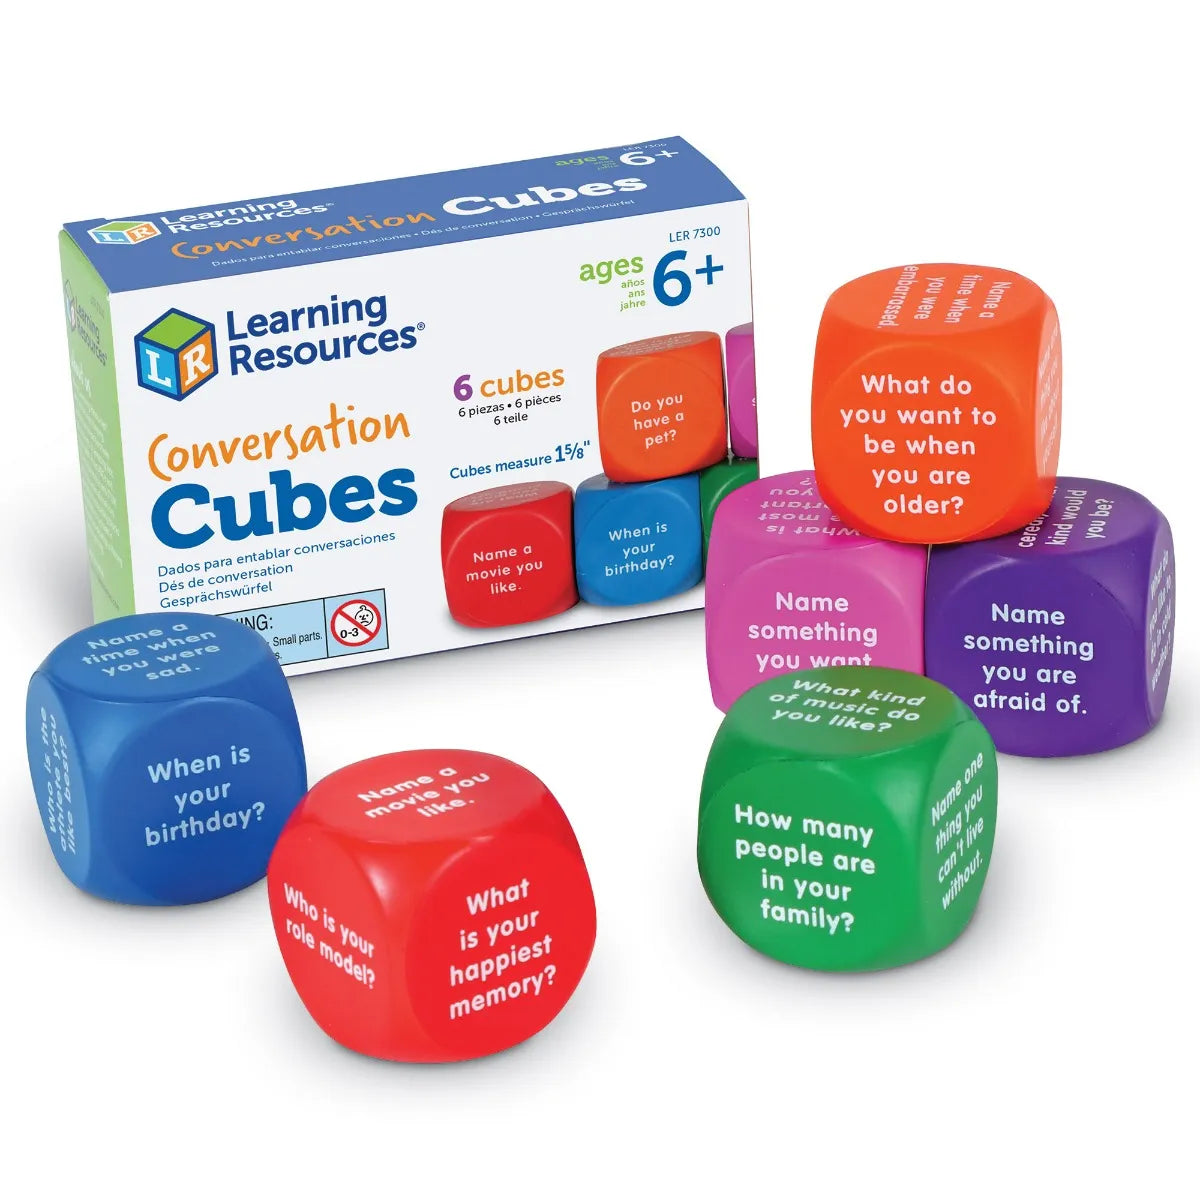 The product package for Conversation Cubes, with several of the cubes placed in front of the box.